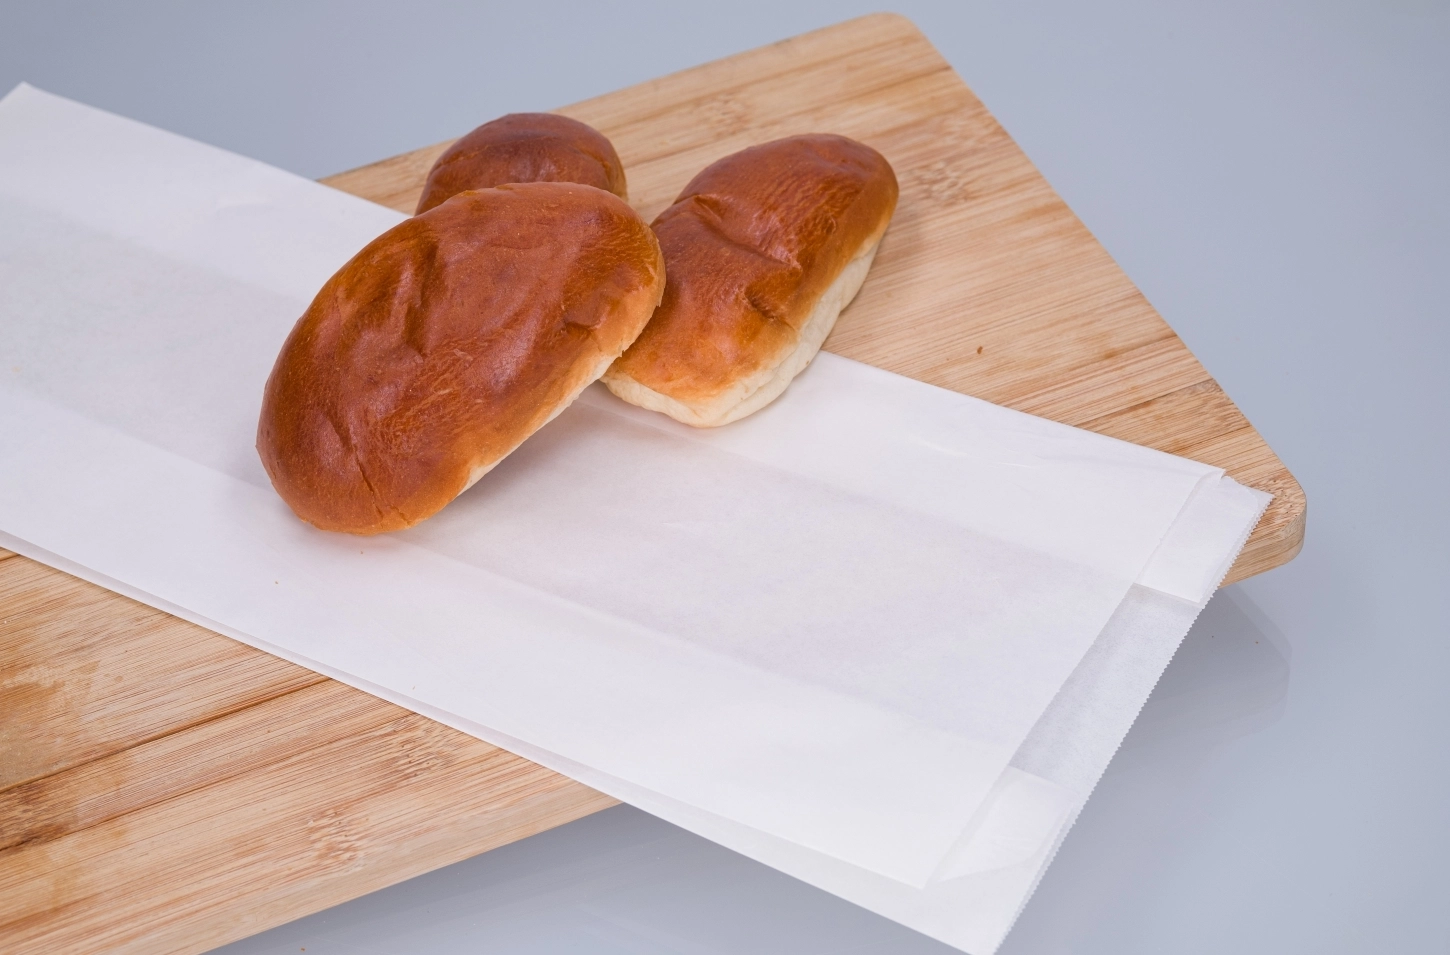 The paper bread bag is available in white, beige, and brown paper.